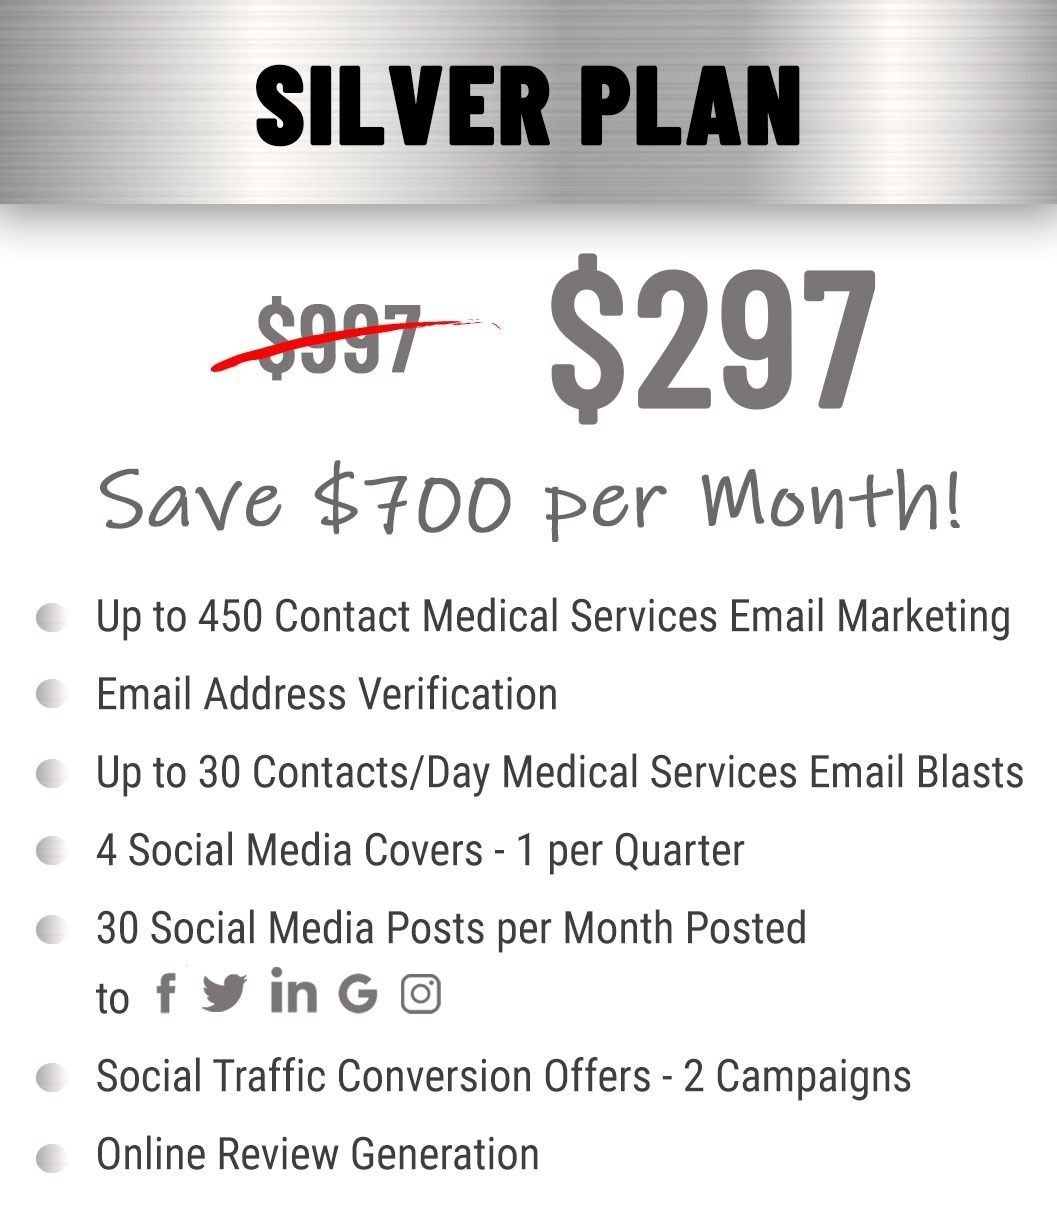 silver plan $297 per month pricing and features for medical services.